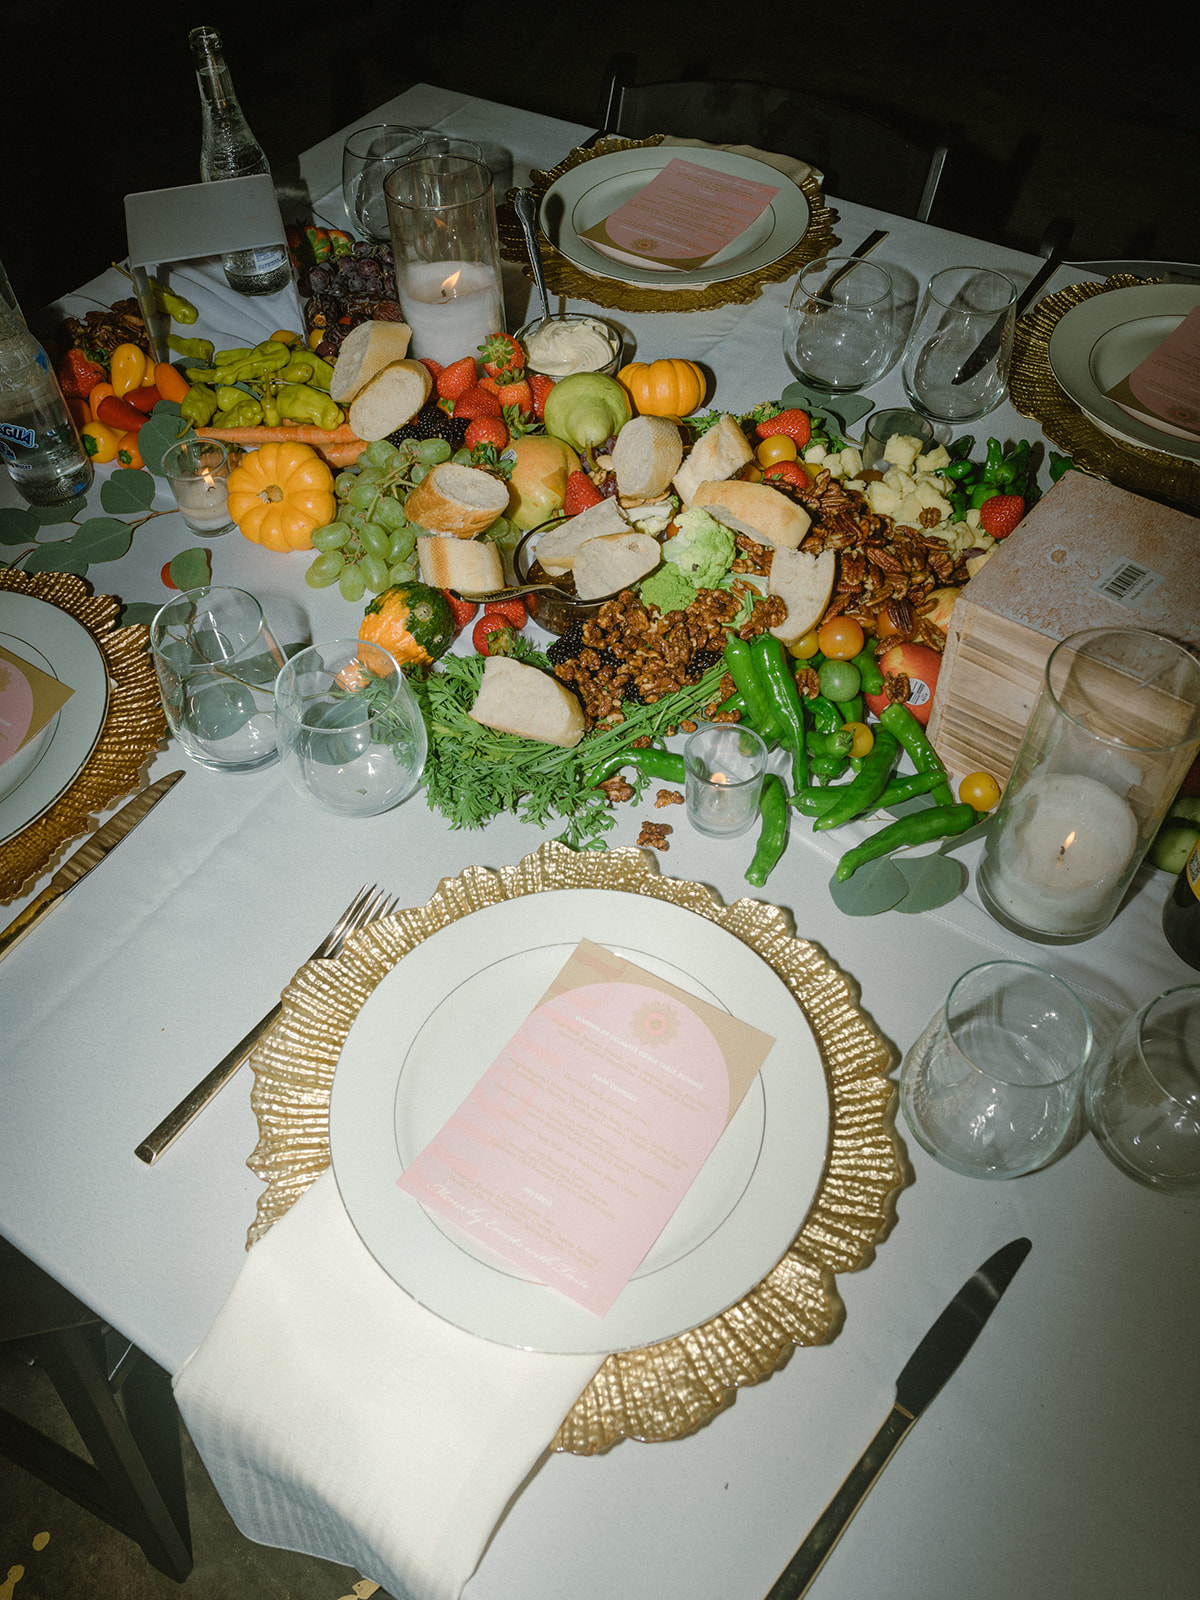 The food doubled as the centerpiece of the table